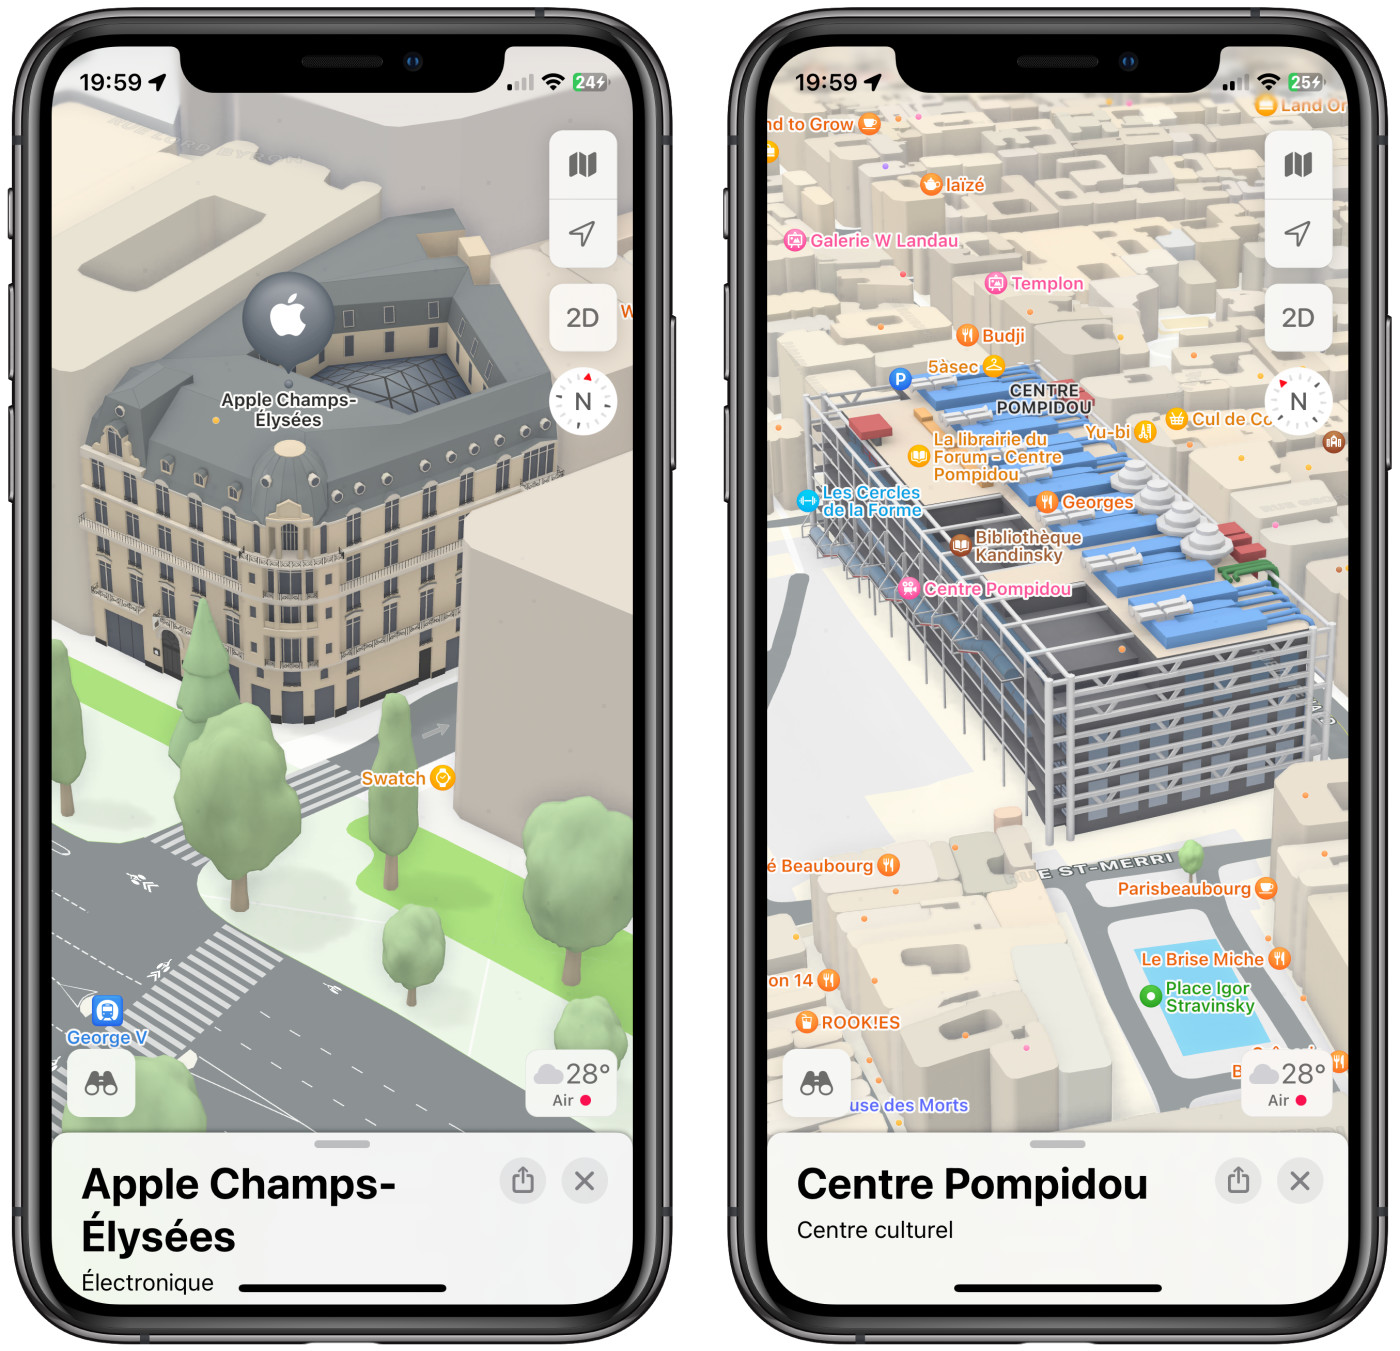 Apple Maps: the detailed 3D experience improves in Paris